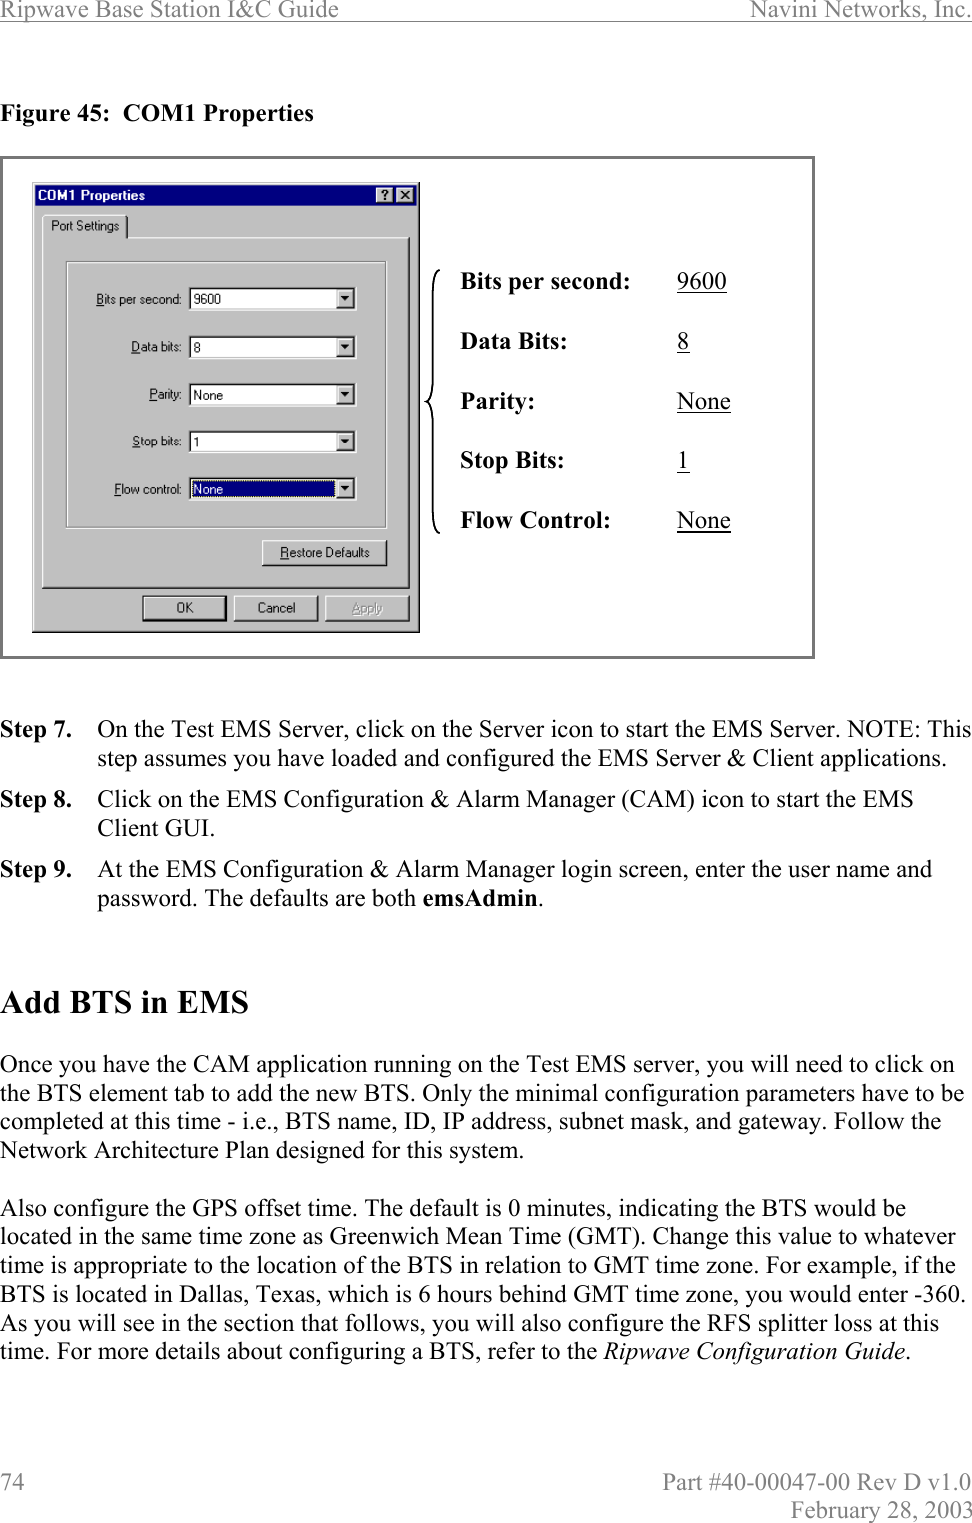 Ripwave Base Station I&amp;C Guide                      Navini Networks, Inc. 74                          Part #40-00047-00 Rev D v1.0 February 28, 2003  Figure 45:  COM1 Properties                     Step 7.  On the Test EMS Server, click on the Server icon to start the EMS Server. NOTE: This step assumes you have loaded and configured the EMS Server &amp; Client applications. Step 8.  Click on the EMS Configuration &amp; Alarm Manager (CAM) icon to start the EMS Client GUI. Step 9.  At the EMS Configuration &amp; Alarm Manager login screen, enter the user name and password. The defaults are both emsAdmin.   Add BTS in EMS  Once you have the CAM application running on the Test EMS server, you will need to click on the BTS element tab to add the new BTS. Only the minimal configuration parameters have to be completed at this time - i.e., BTS name, ID, IP address, subnet mask, and gateway. Follow the Network Architecture Plan designed for this system.   Also configure the GPS offset time. The default is 0 minutes, indicating the BTS would be located in the same time zone as Greenwich Mean Time (GMT). Change this value to whatever time is appropriate to the location of the BTS in relation to GMT time zone. For example, if the BTS is located in Dallas, Texas, which is 6 hours behind GMT time zone, you would enter -360. As you will see in the section that follows, you will also configure the RFS splitter loss at this time. For more details about configuring a BTS, refer to the Ripwave Configuration Guide.   Bits per second:   9600Data Bits:   8Parity:   NoneStop Bits:   1Flow Control:   NoneBits per second:   9600Data Bits:   8Parity:   NoneStop Bits:   1Flow Control:   None